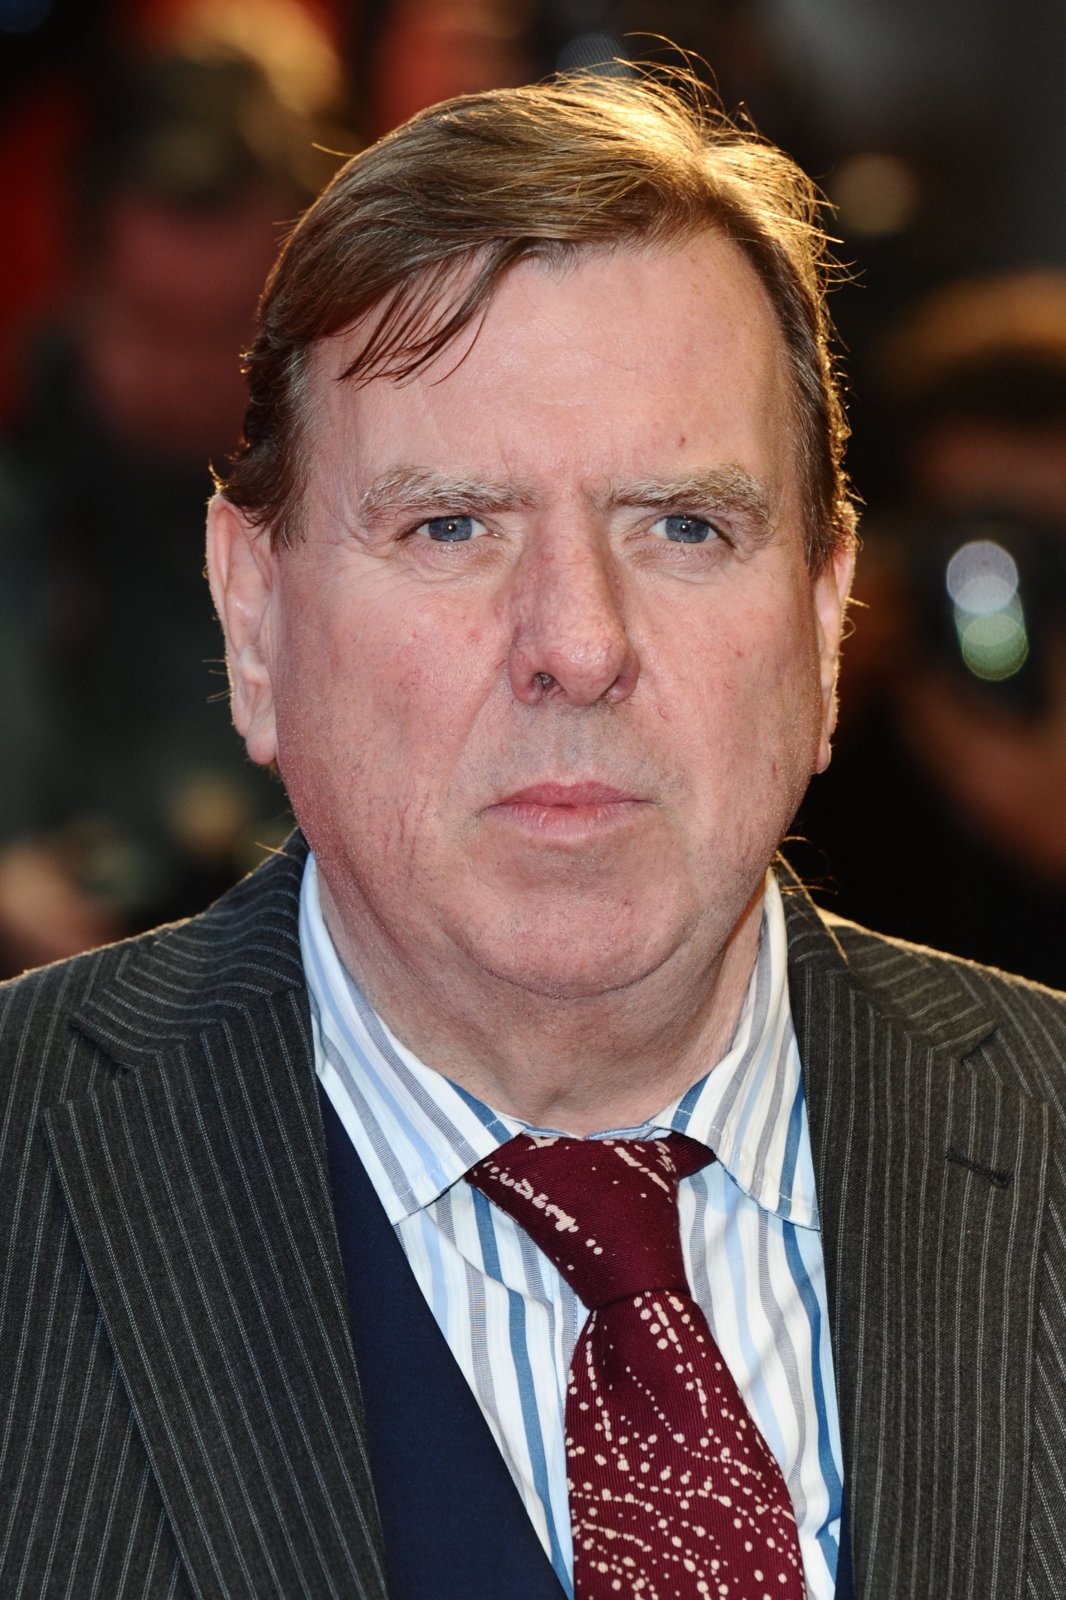 Timothy Spall, Londýn (13.10.2012) – Featureflash Photo Agency / Shutterstock